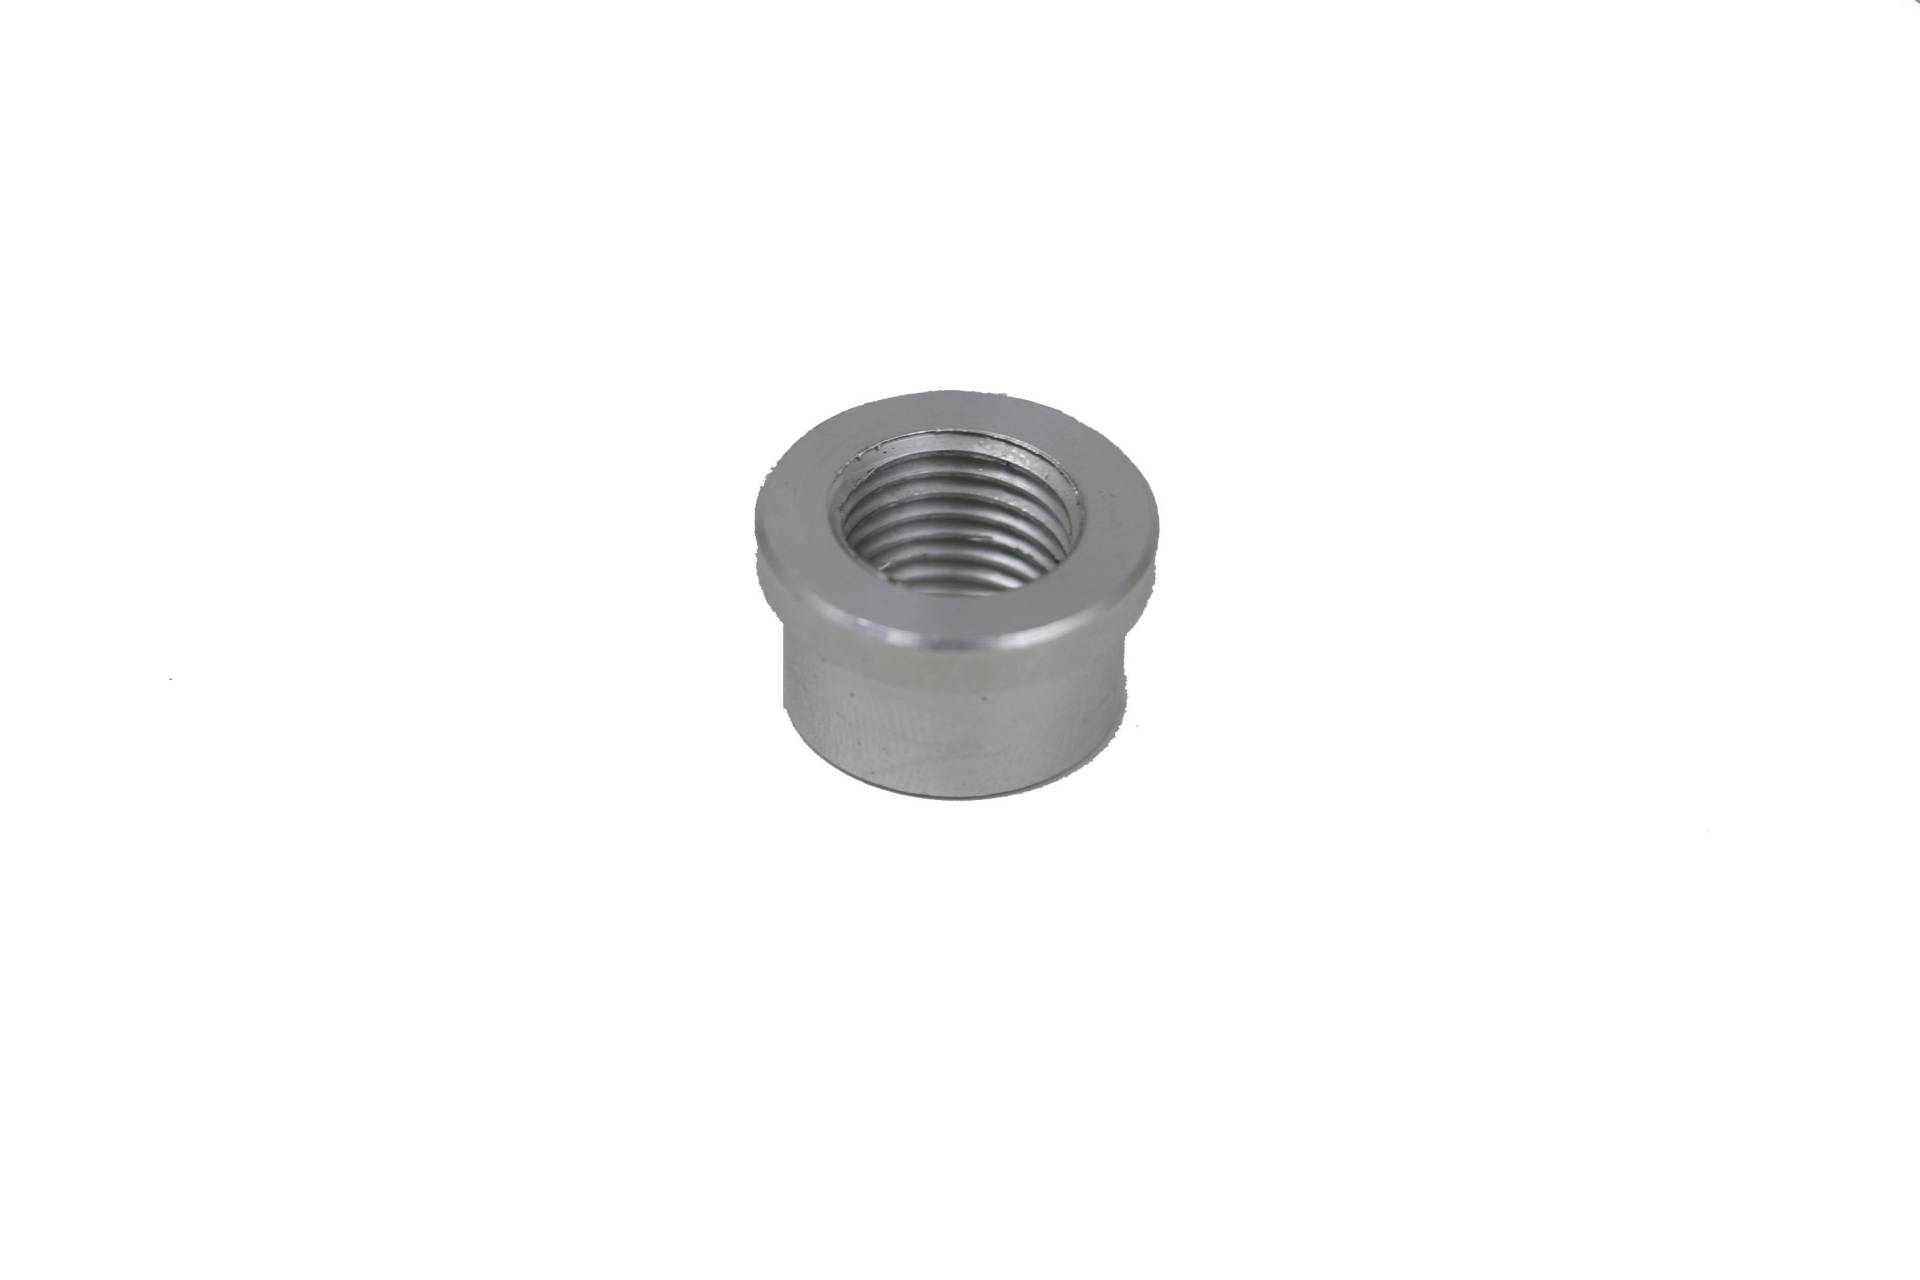 Wizard Cooling Inc - Weldable Metric Bungs M14 x 1.5